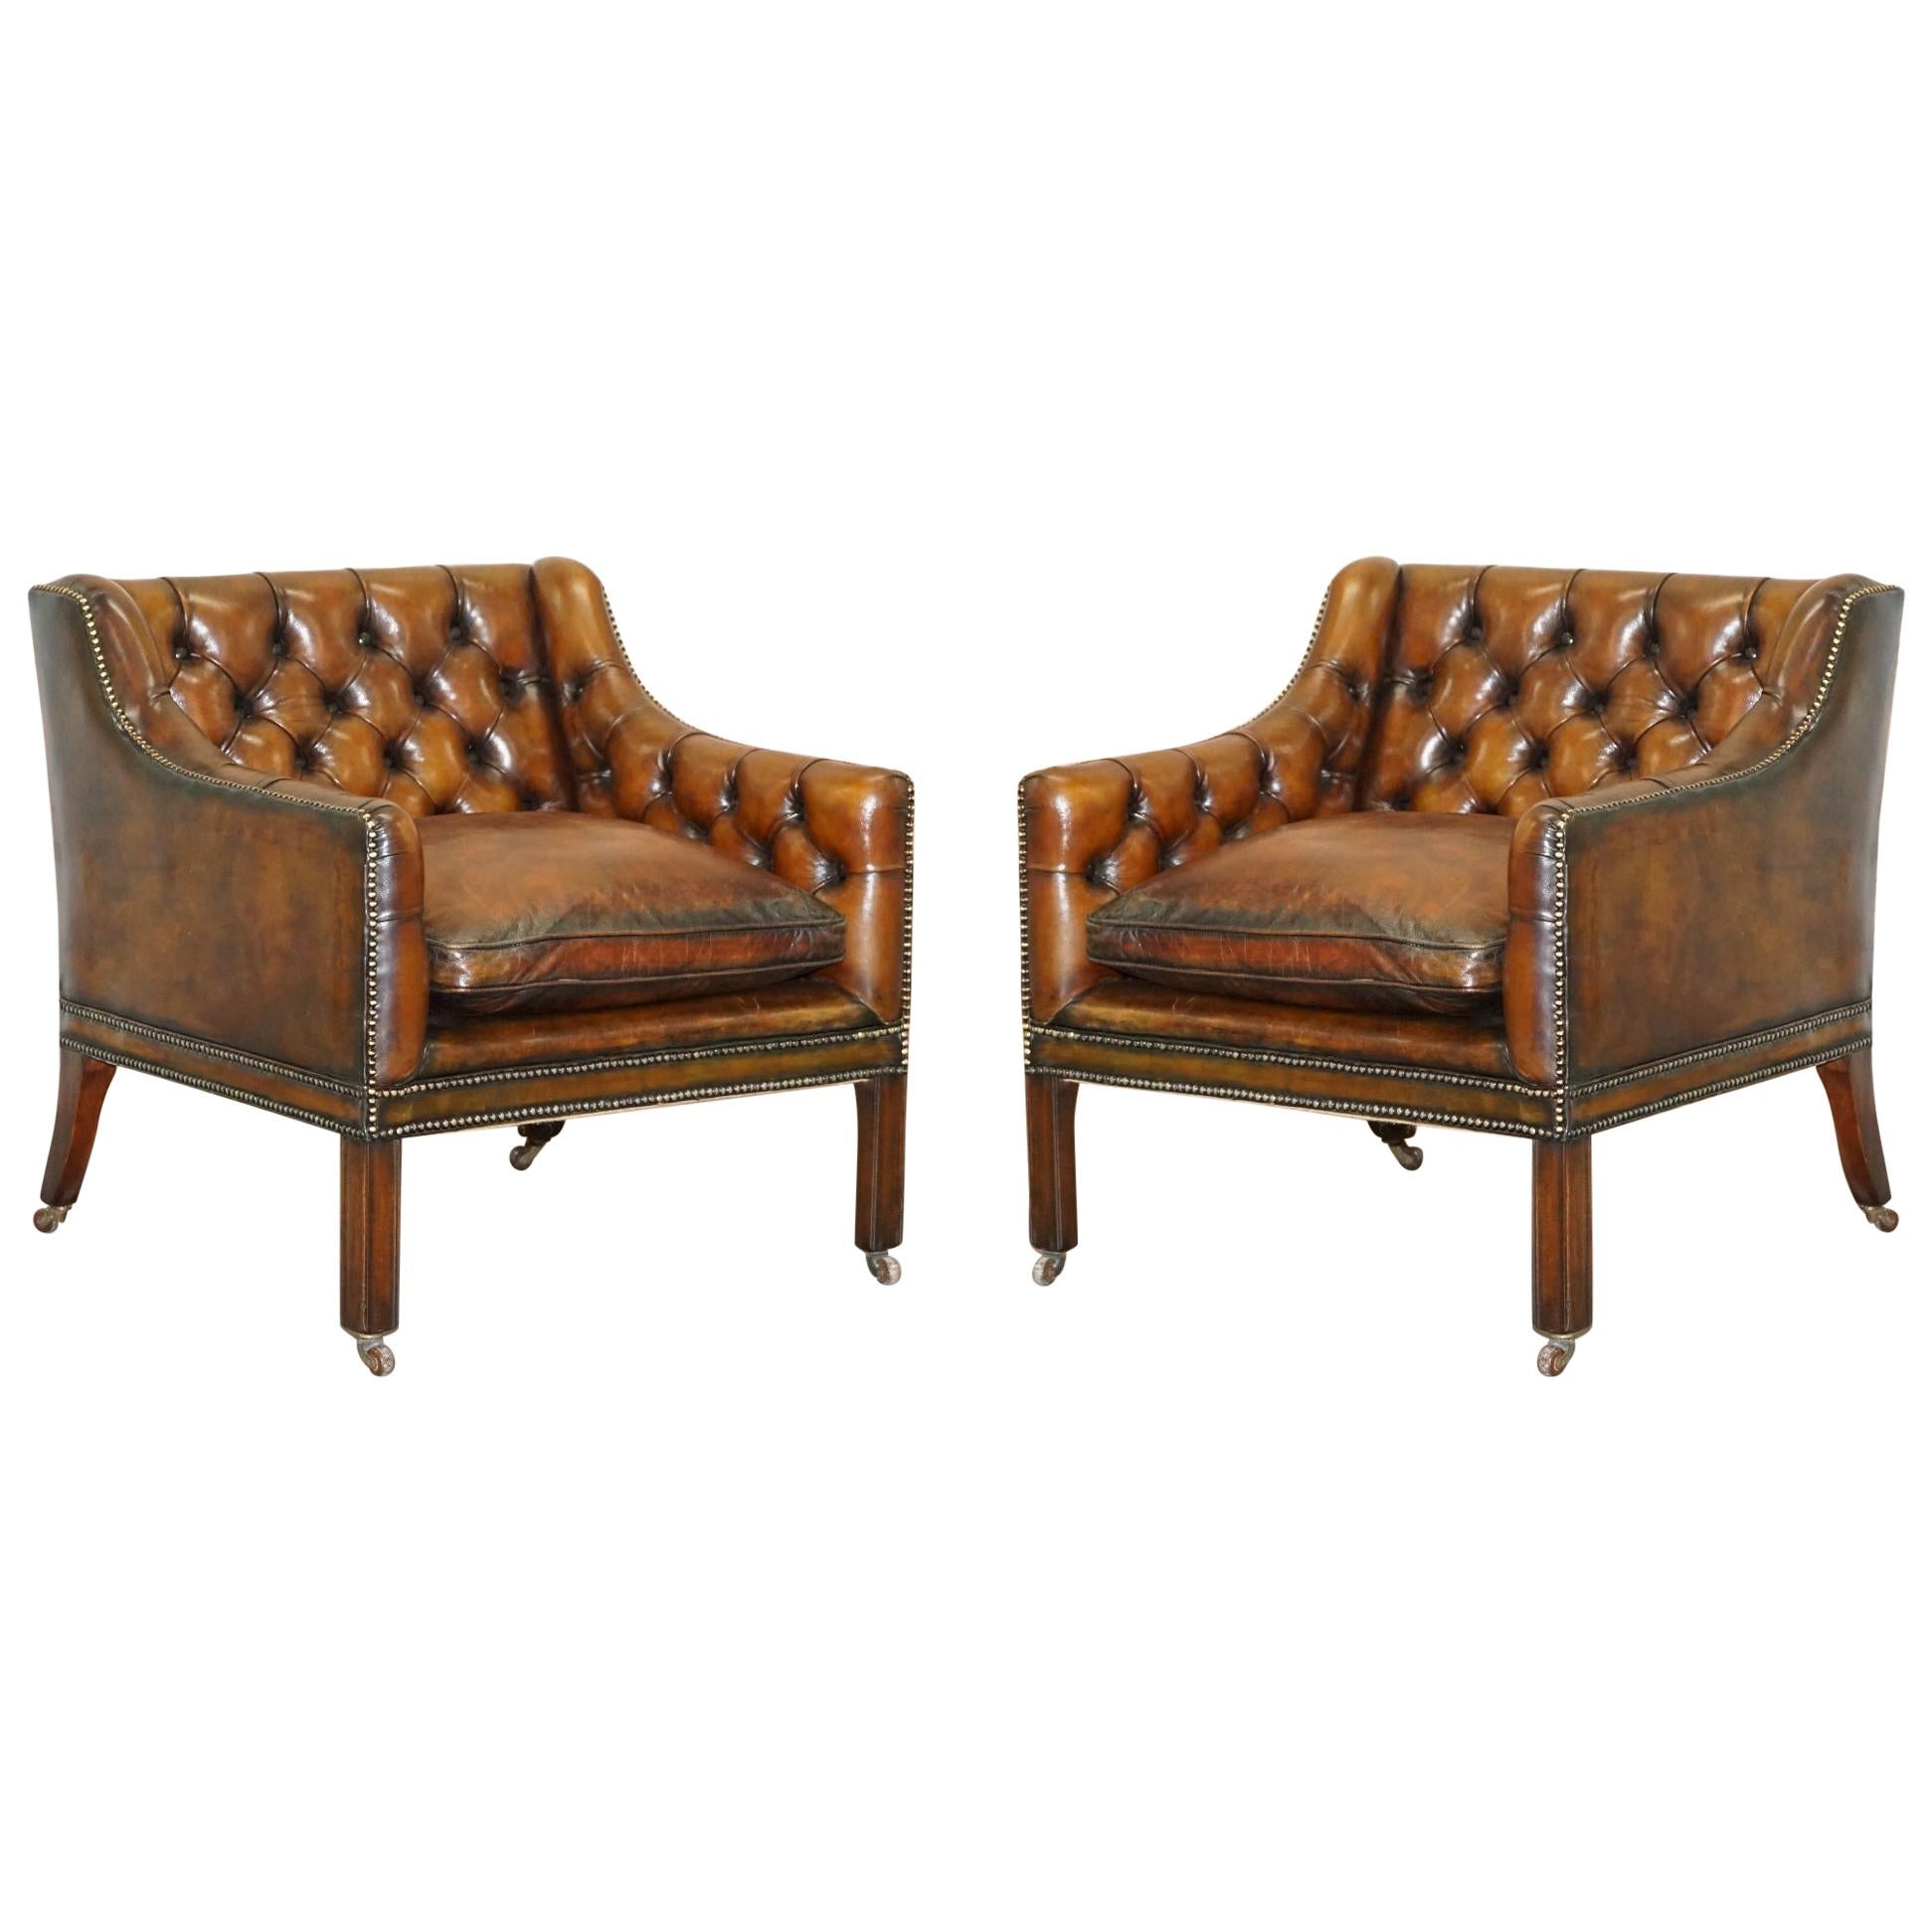 Pair of Very Rare Chesterfield Lutyen's Style Viceroy's Brown Leather Armchairs